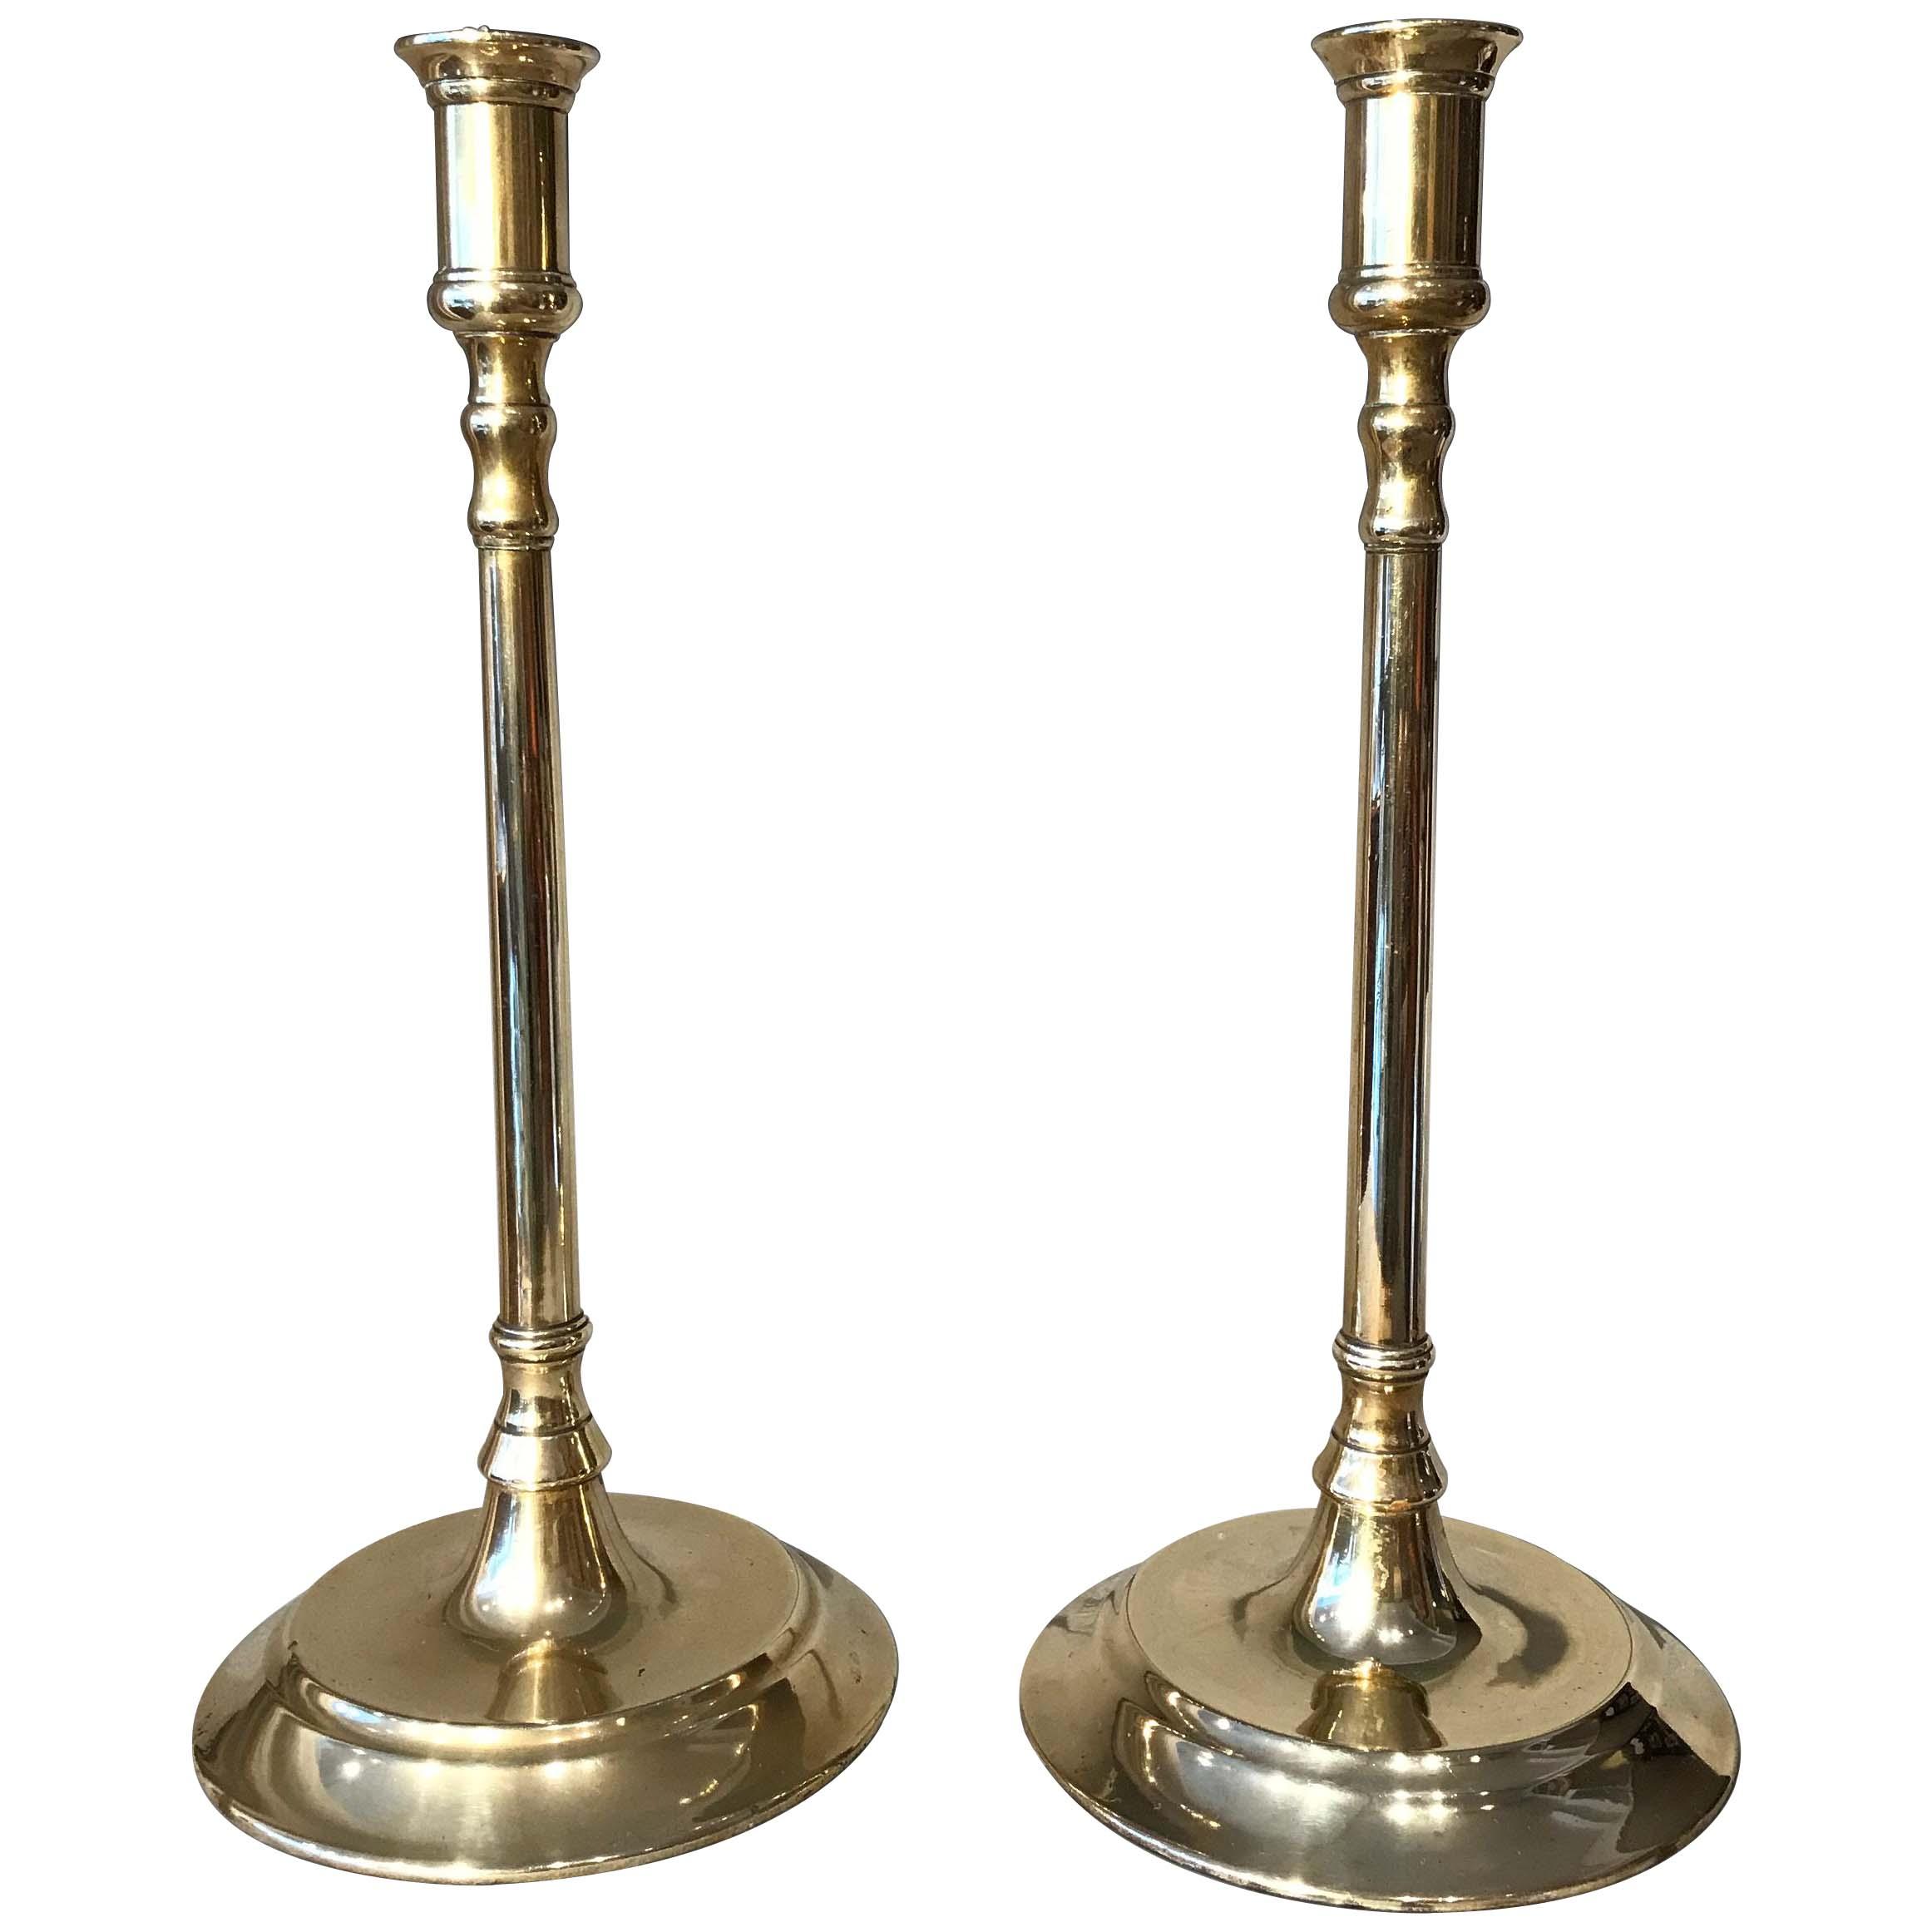 Pair of Early 19th. Century Tall Brass Candlesticks